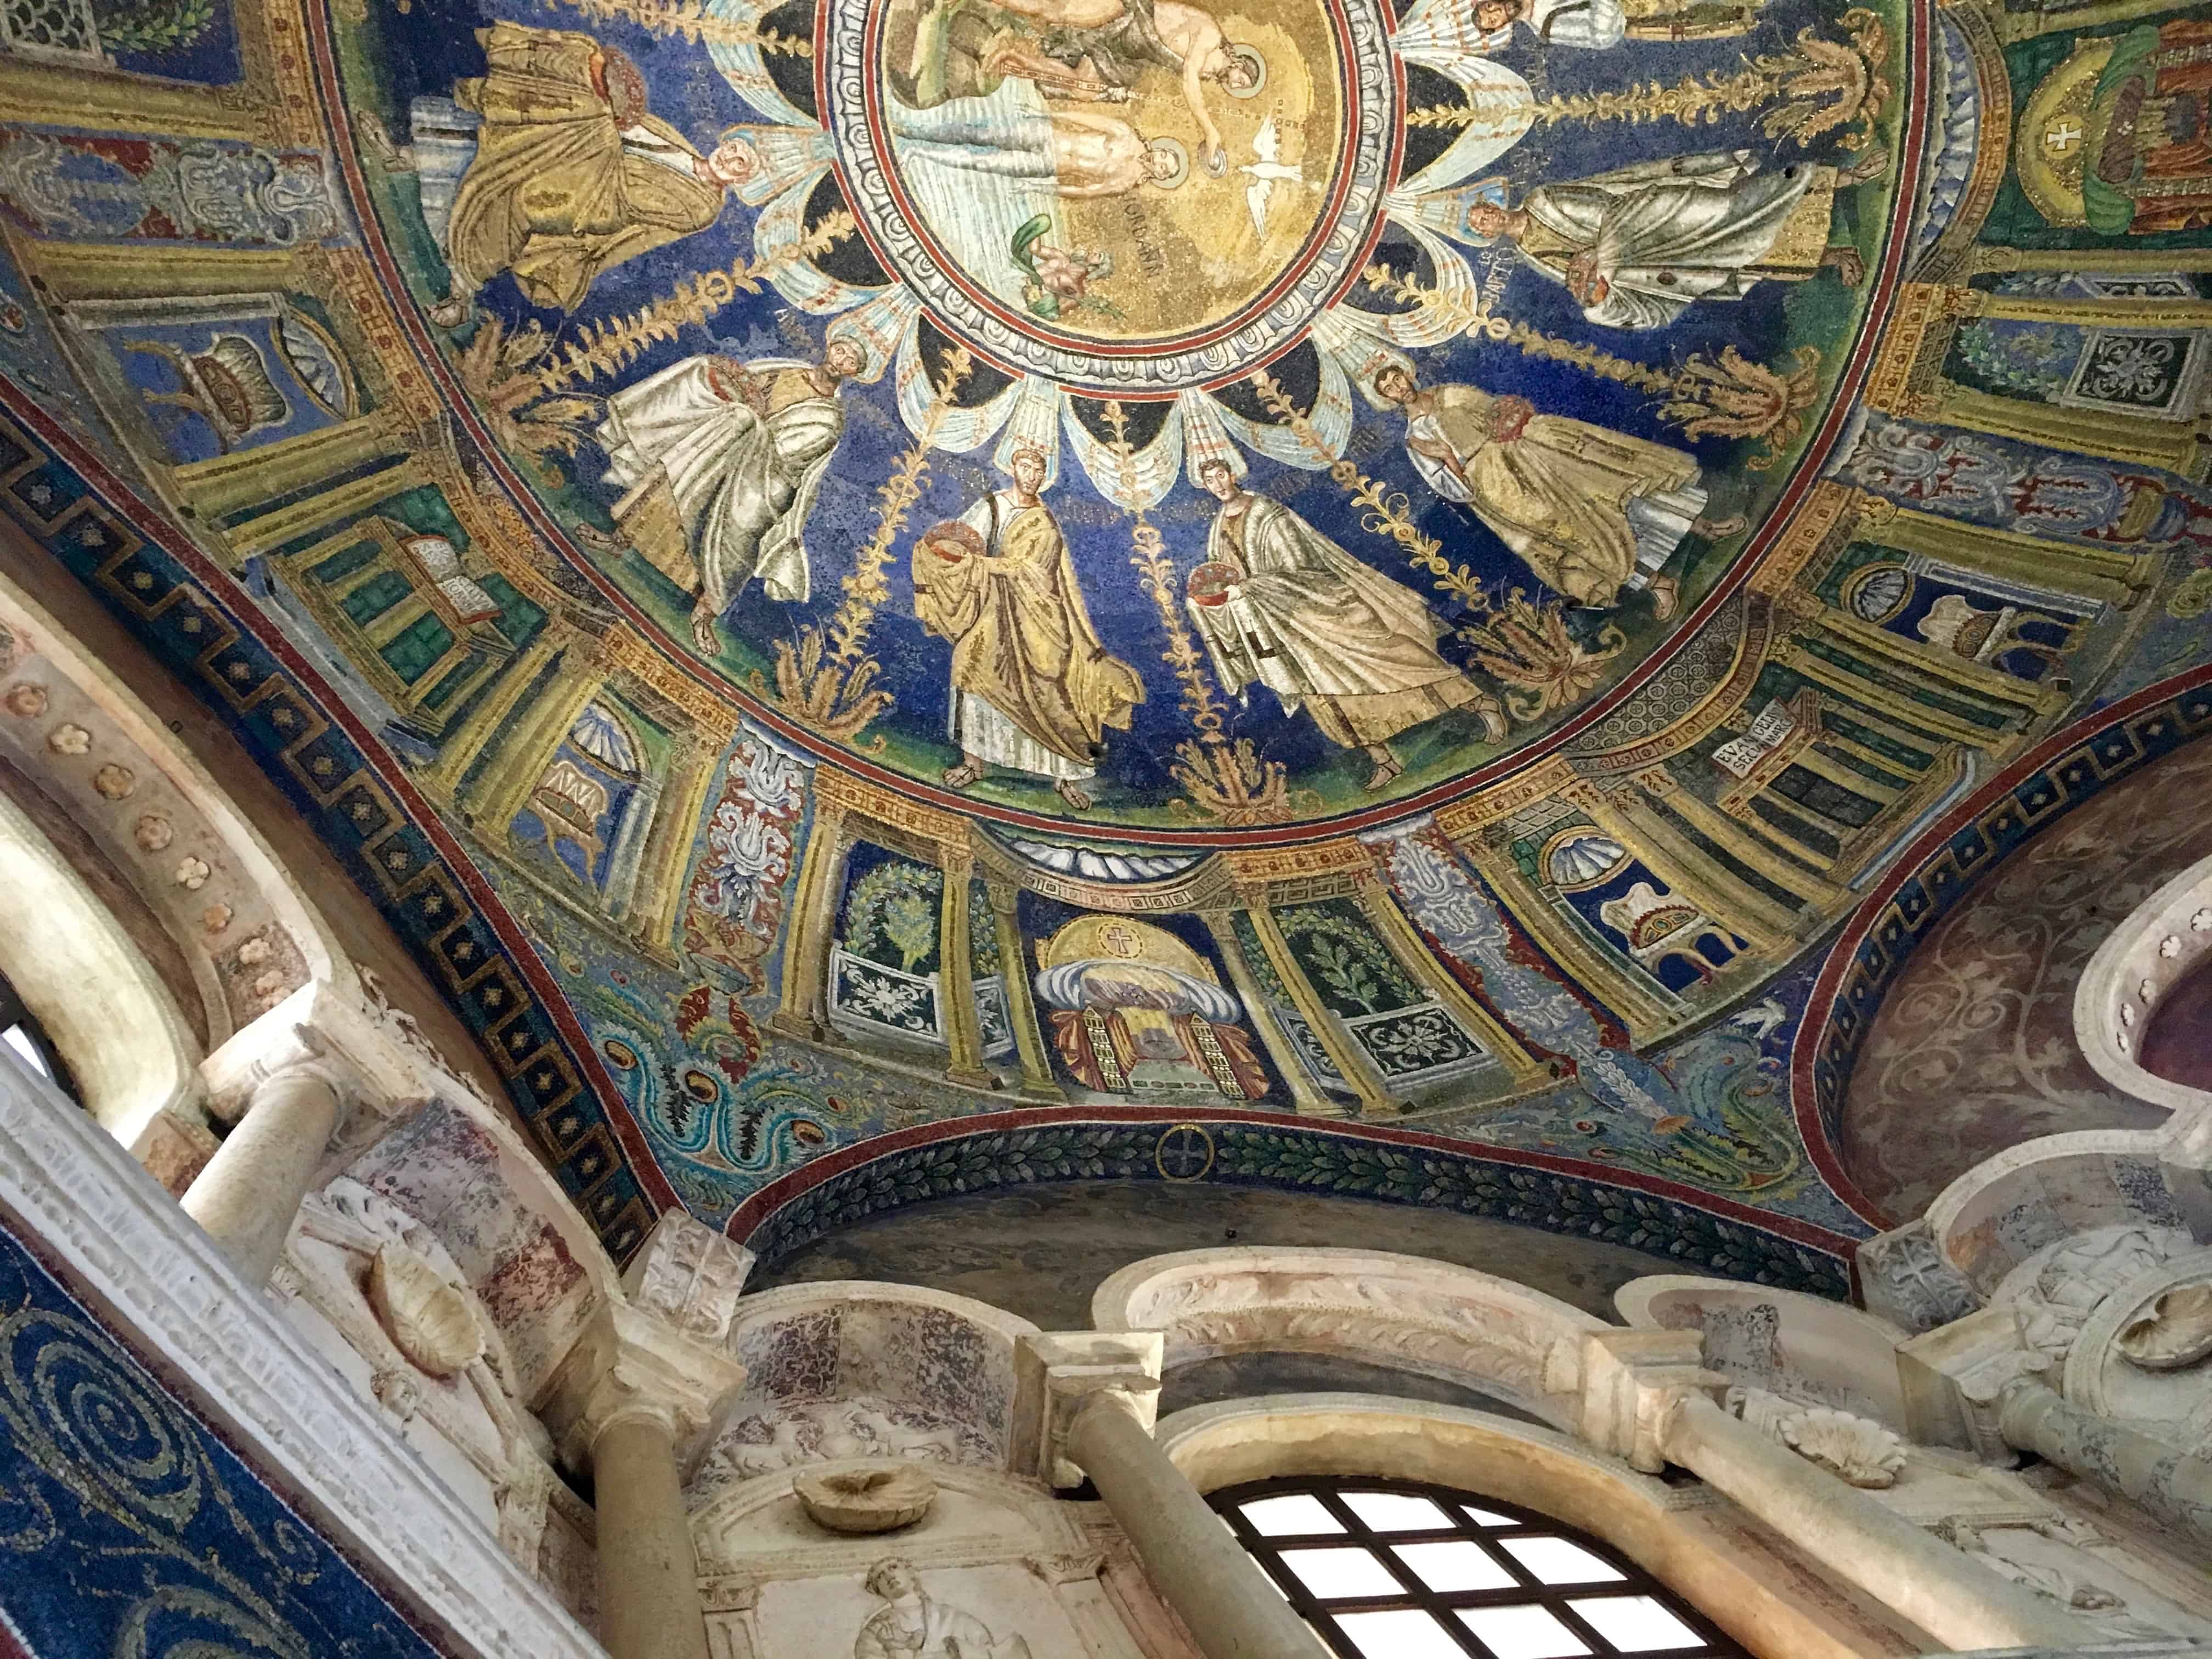 Exquisite mosaic ceiling and marble walls in the Battistero Neoniano, Ravenna, Italy